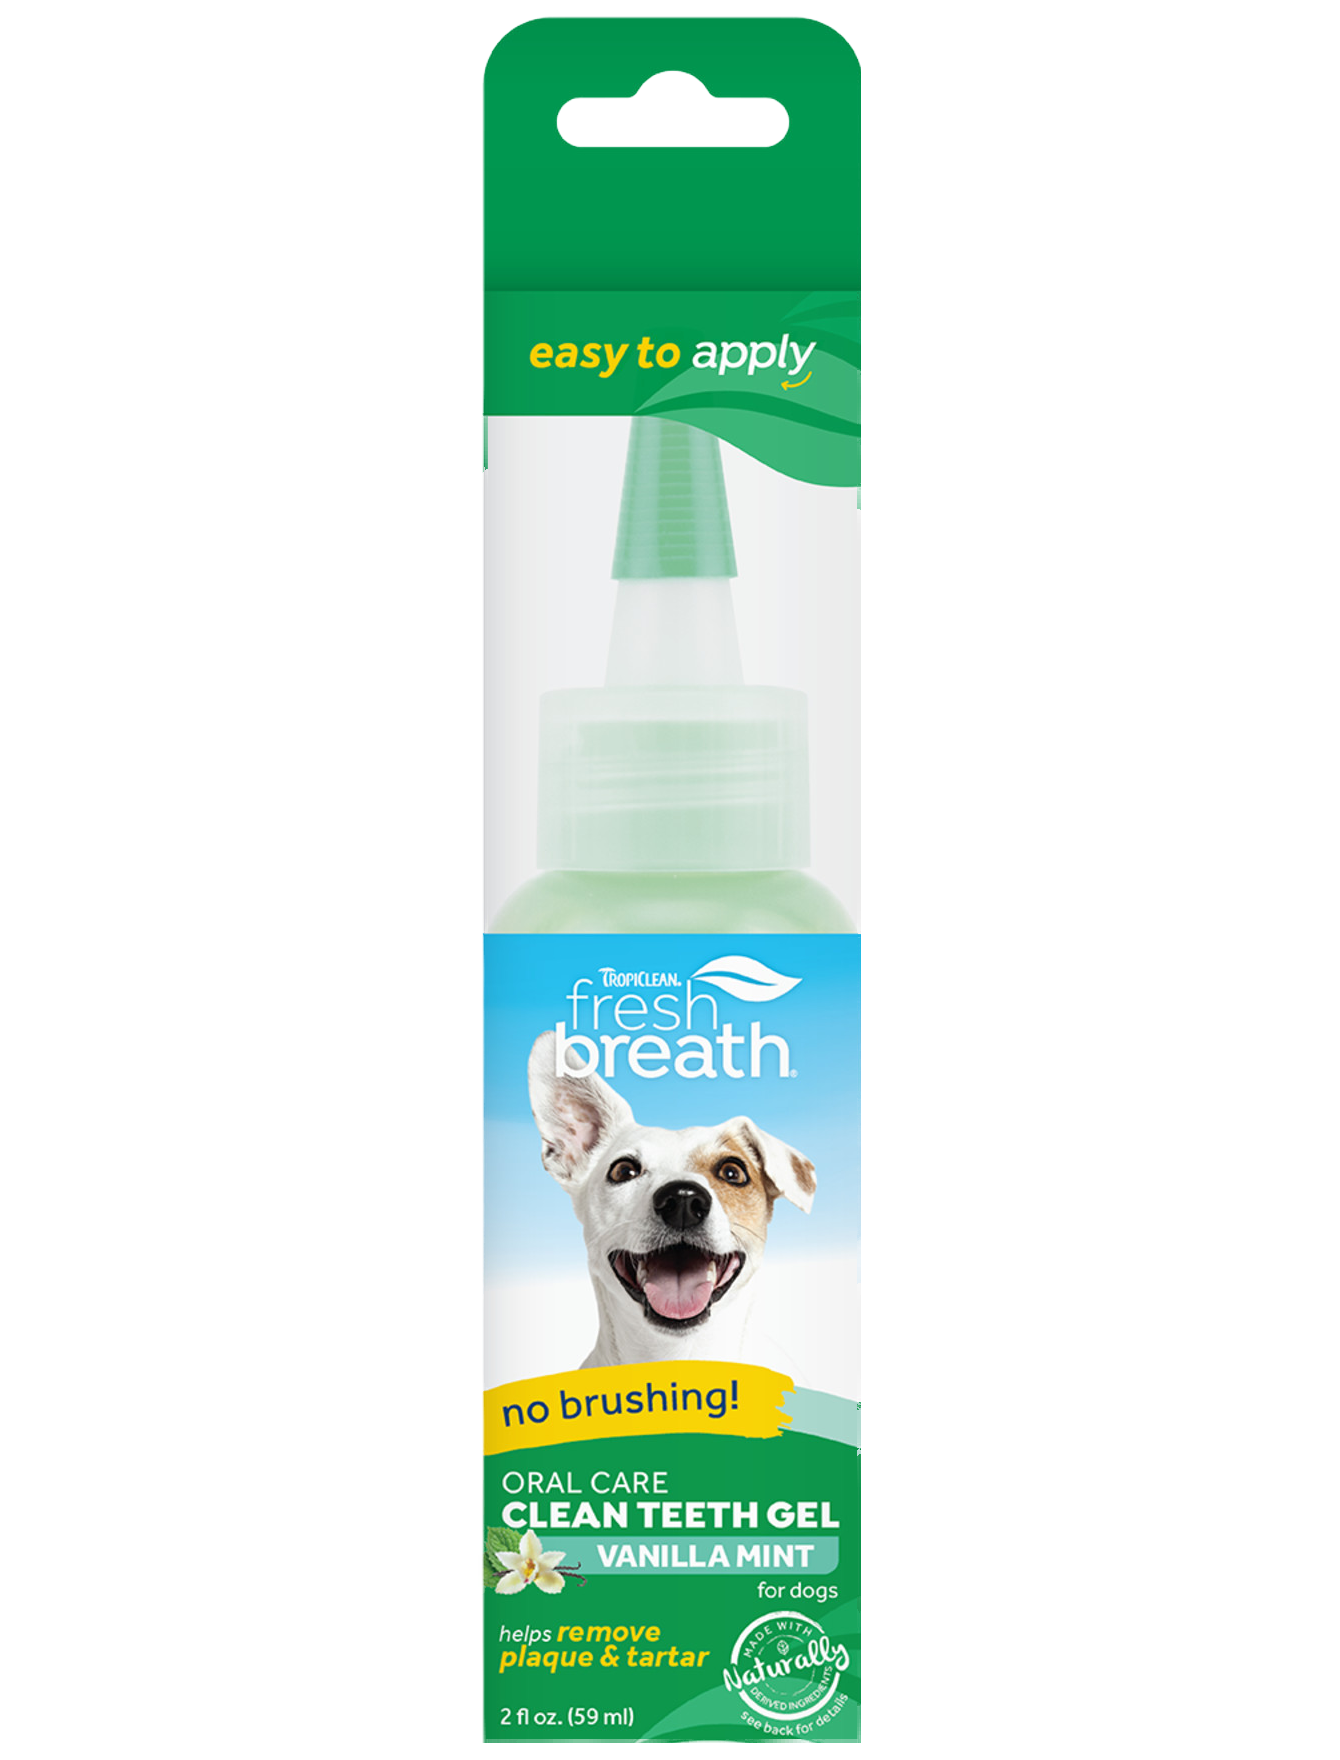 Super Soft Tooth Brush 360 ° Oral Cleaning Pet Toothbrush Remove Bad Breath  Tartar Tooth Brush Dog Cat Oral Care Mouth Clean NEW